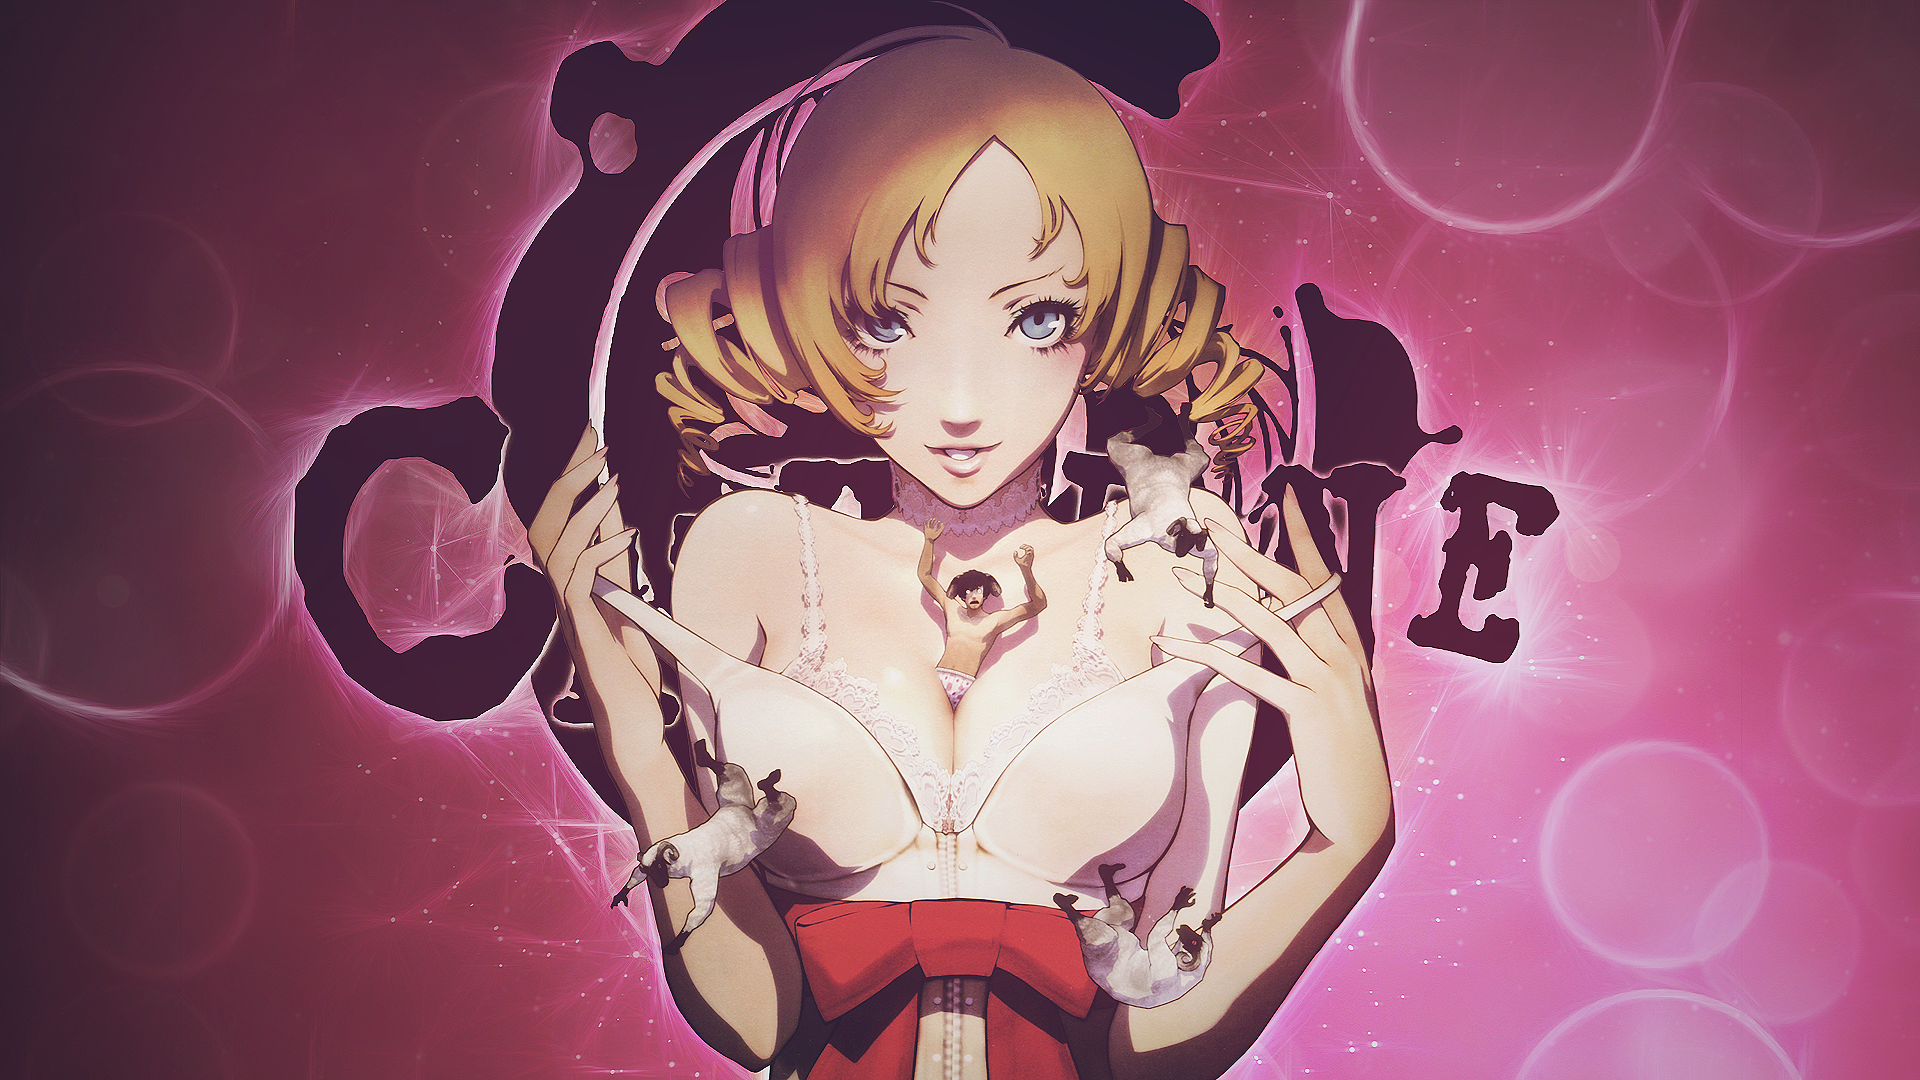 General 1920x1080 Catherine video games video game girls